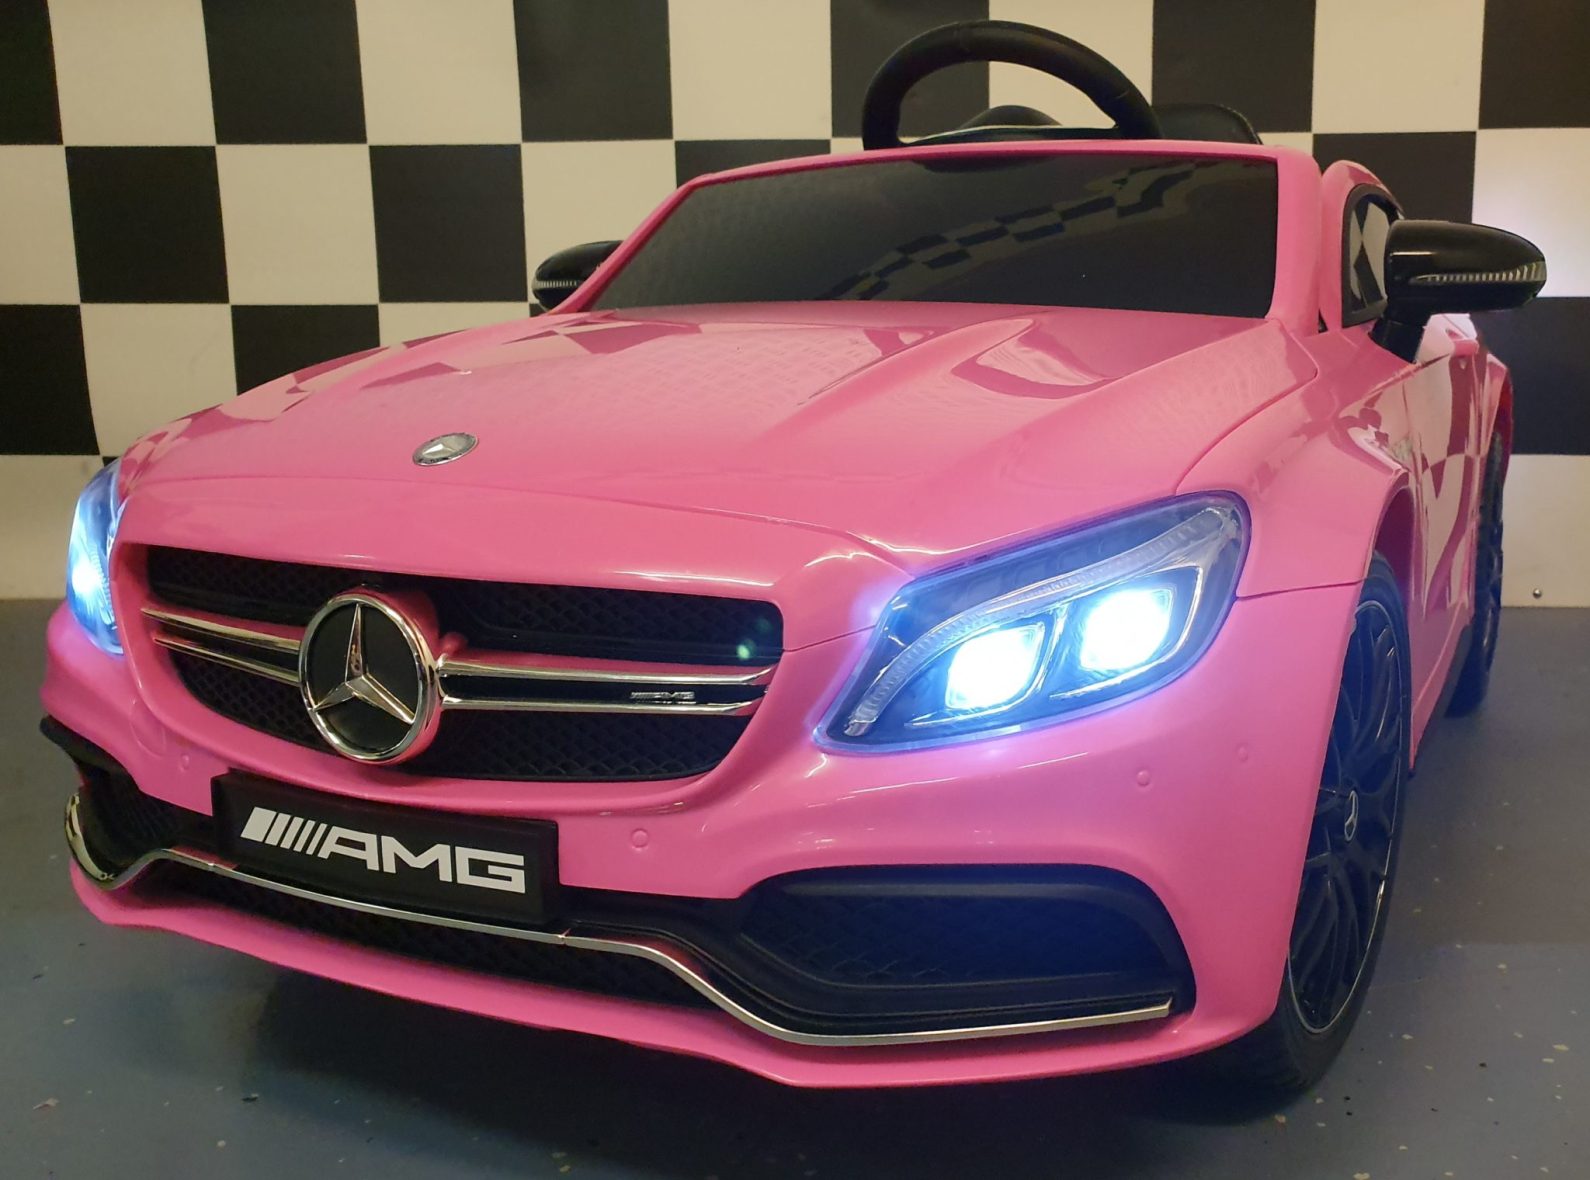 Children’s Car Mercedes C63 12 Volts with Remote Control Pink